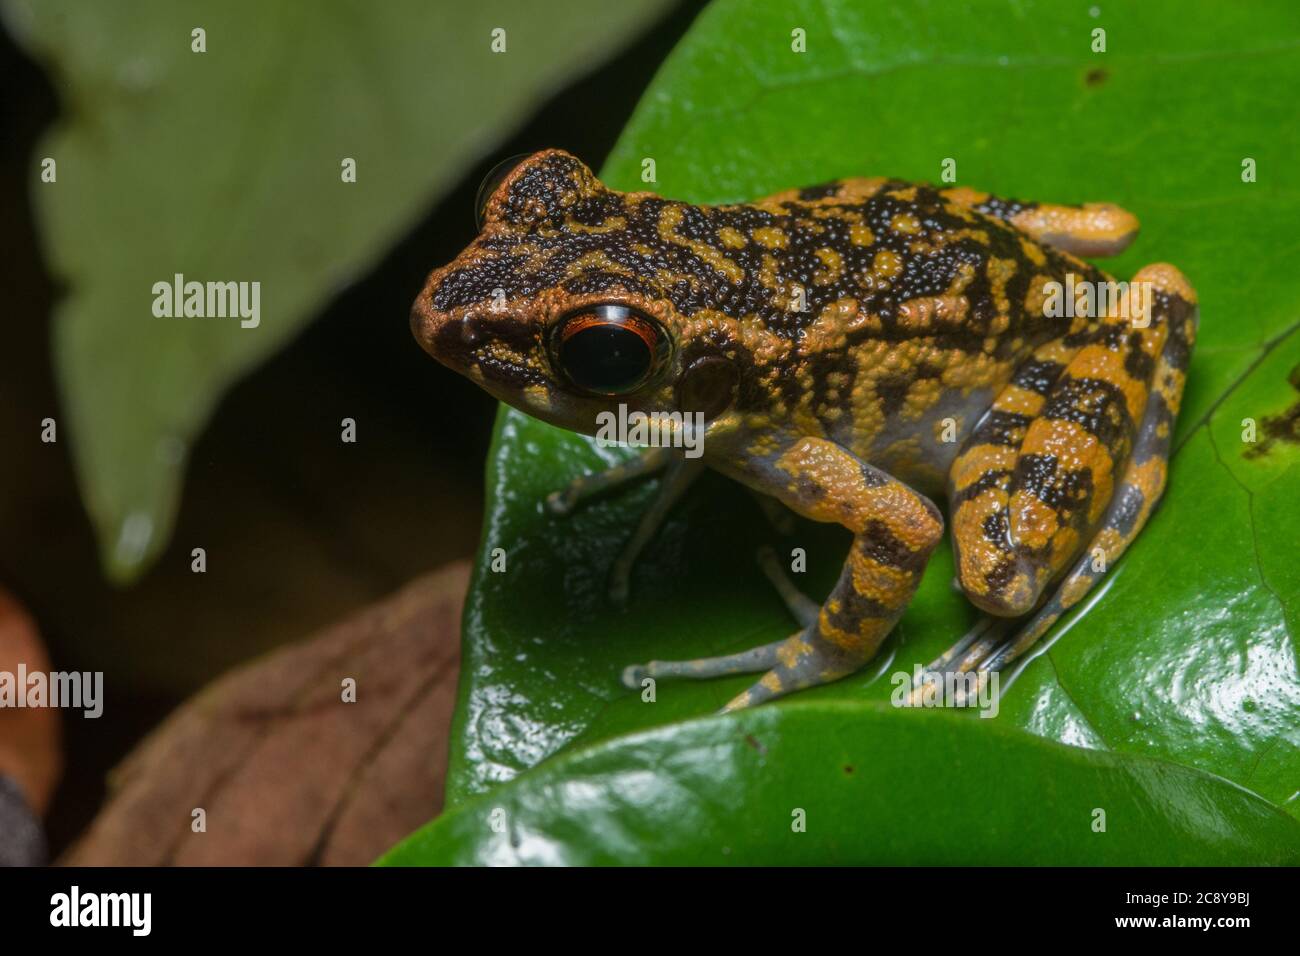 The spotted stream frog (Pulchrana picturata) one of Borneo's prettiest frog species. Stock Photo